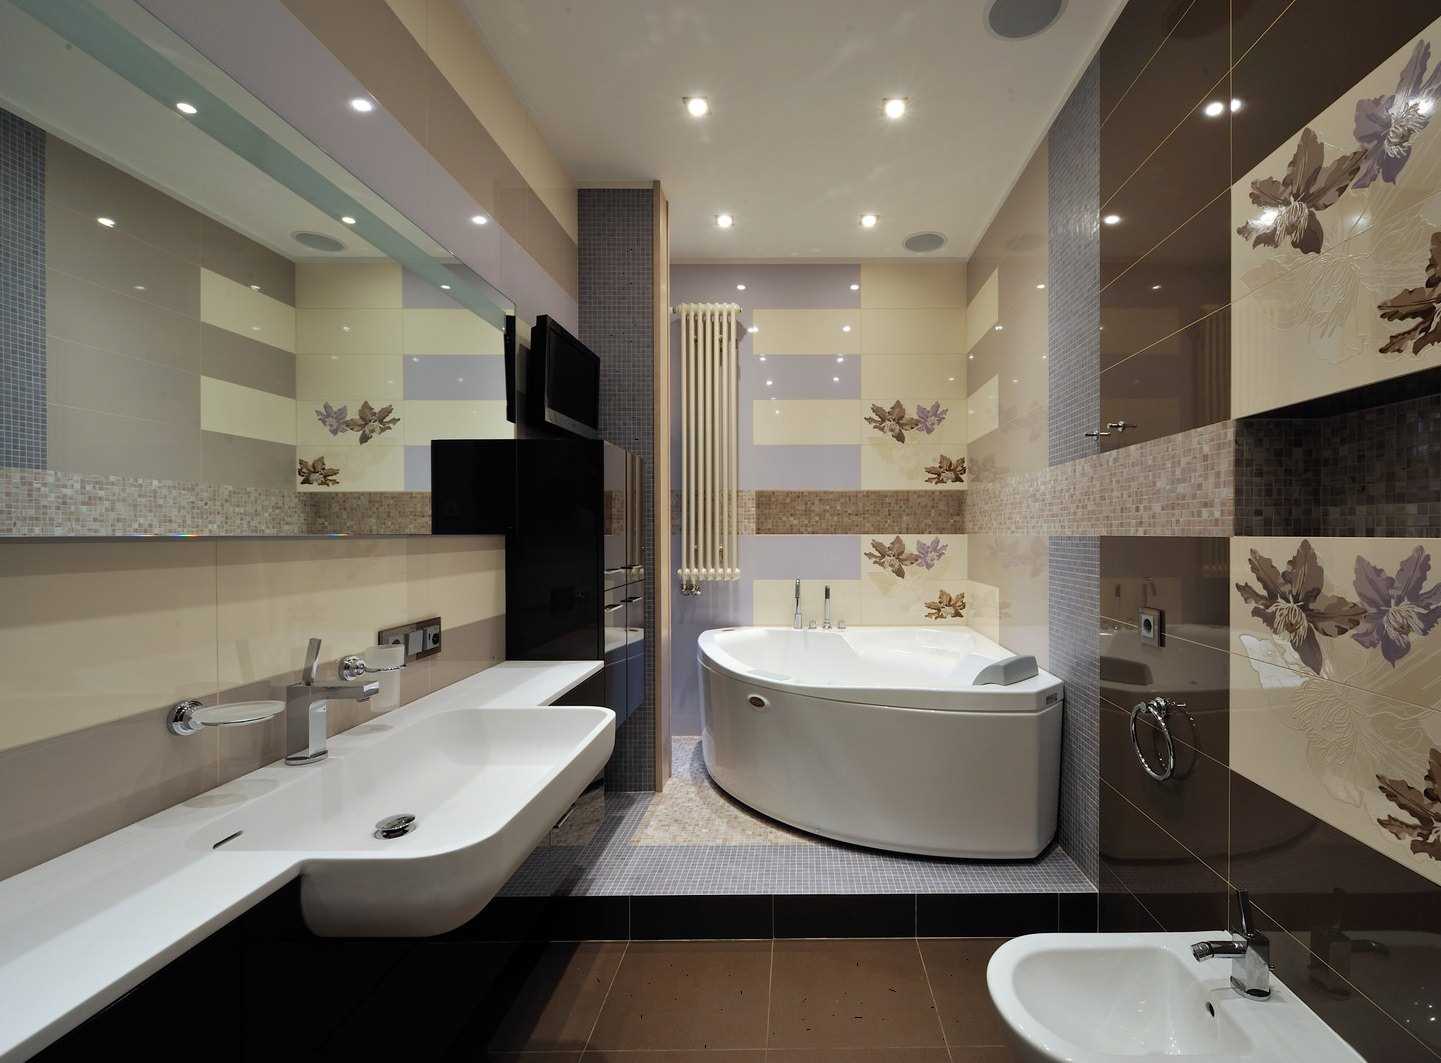 variant of the bright style of the bathroom with a corner bath